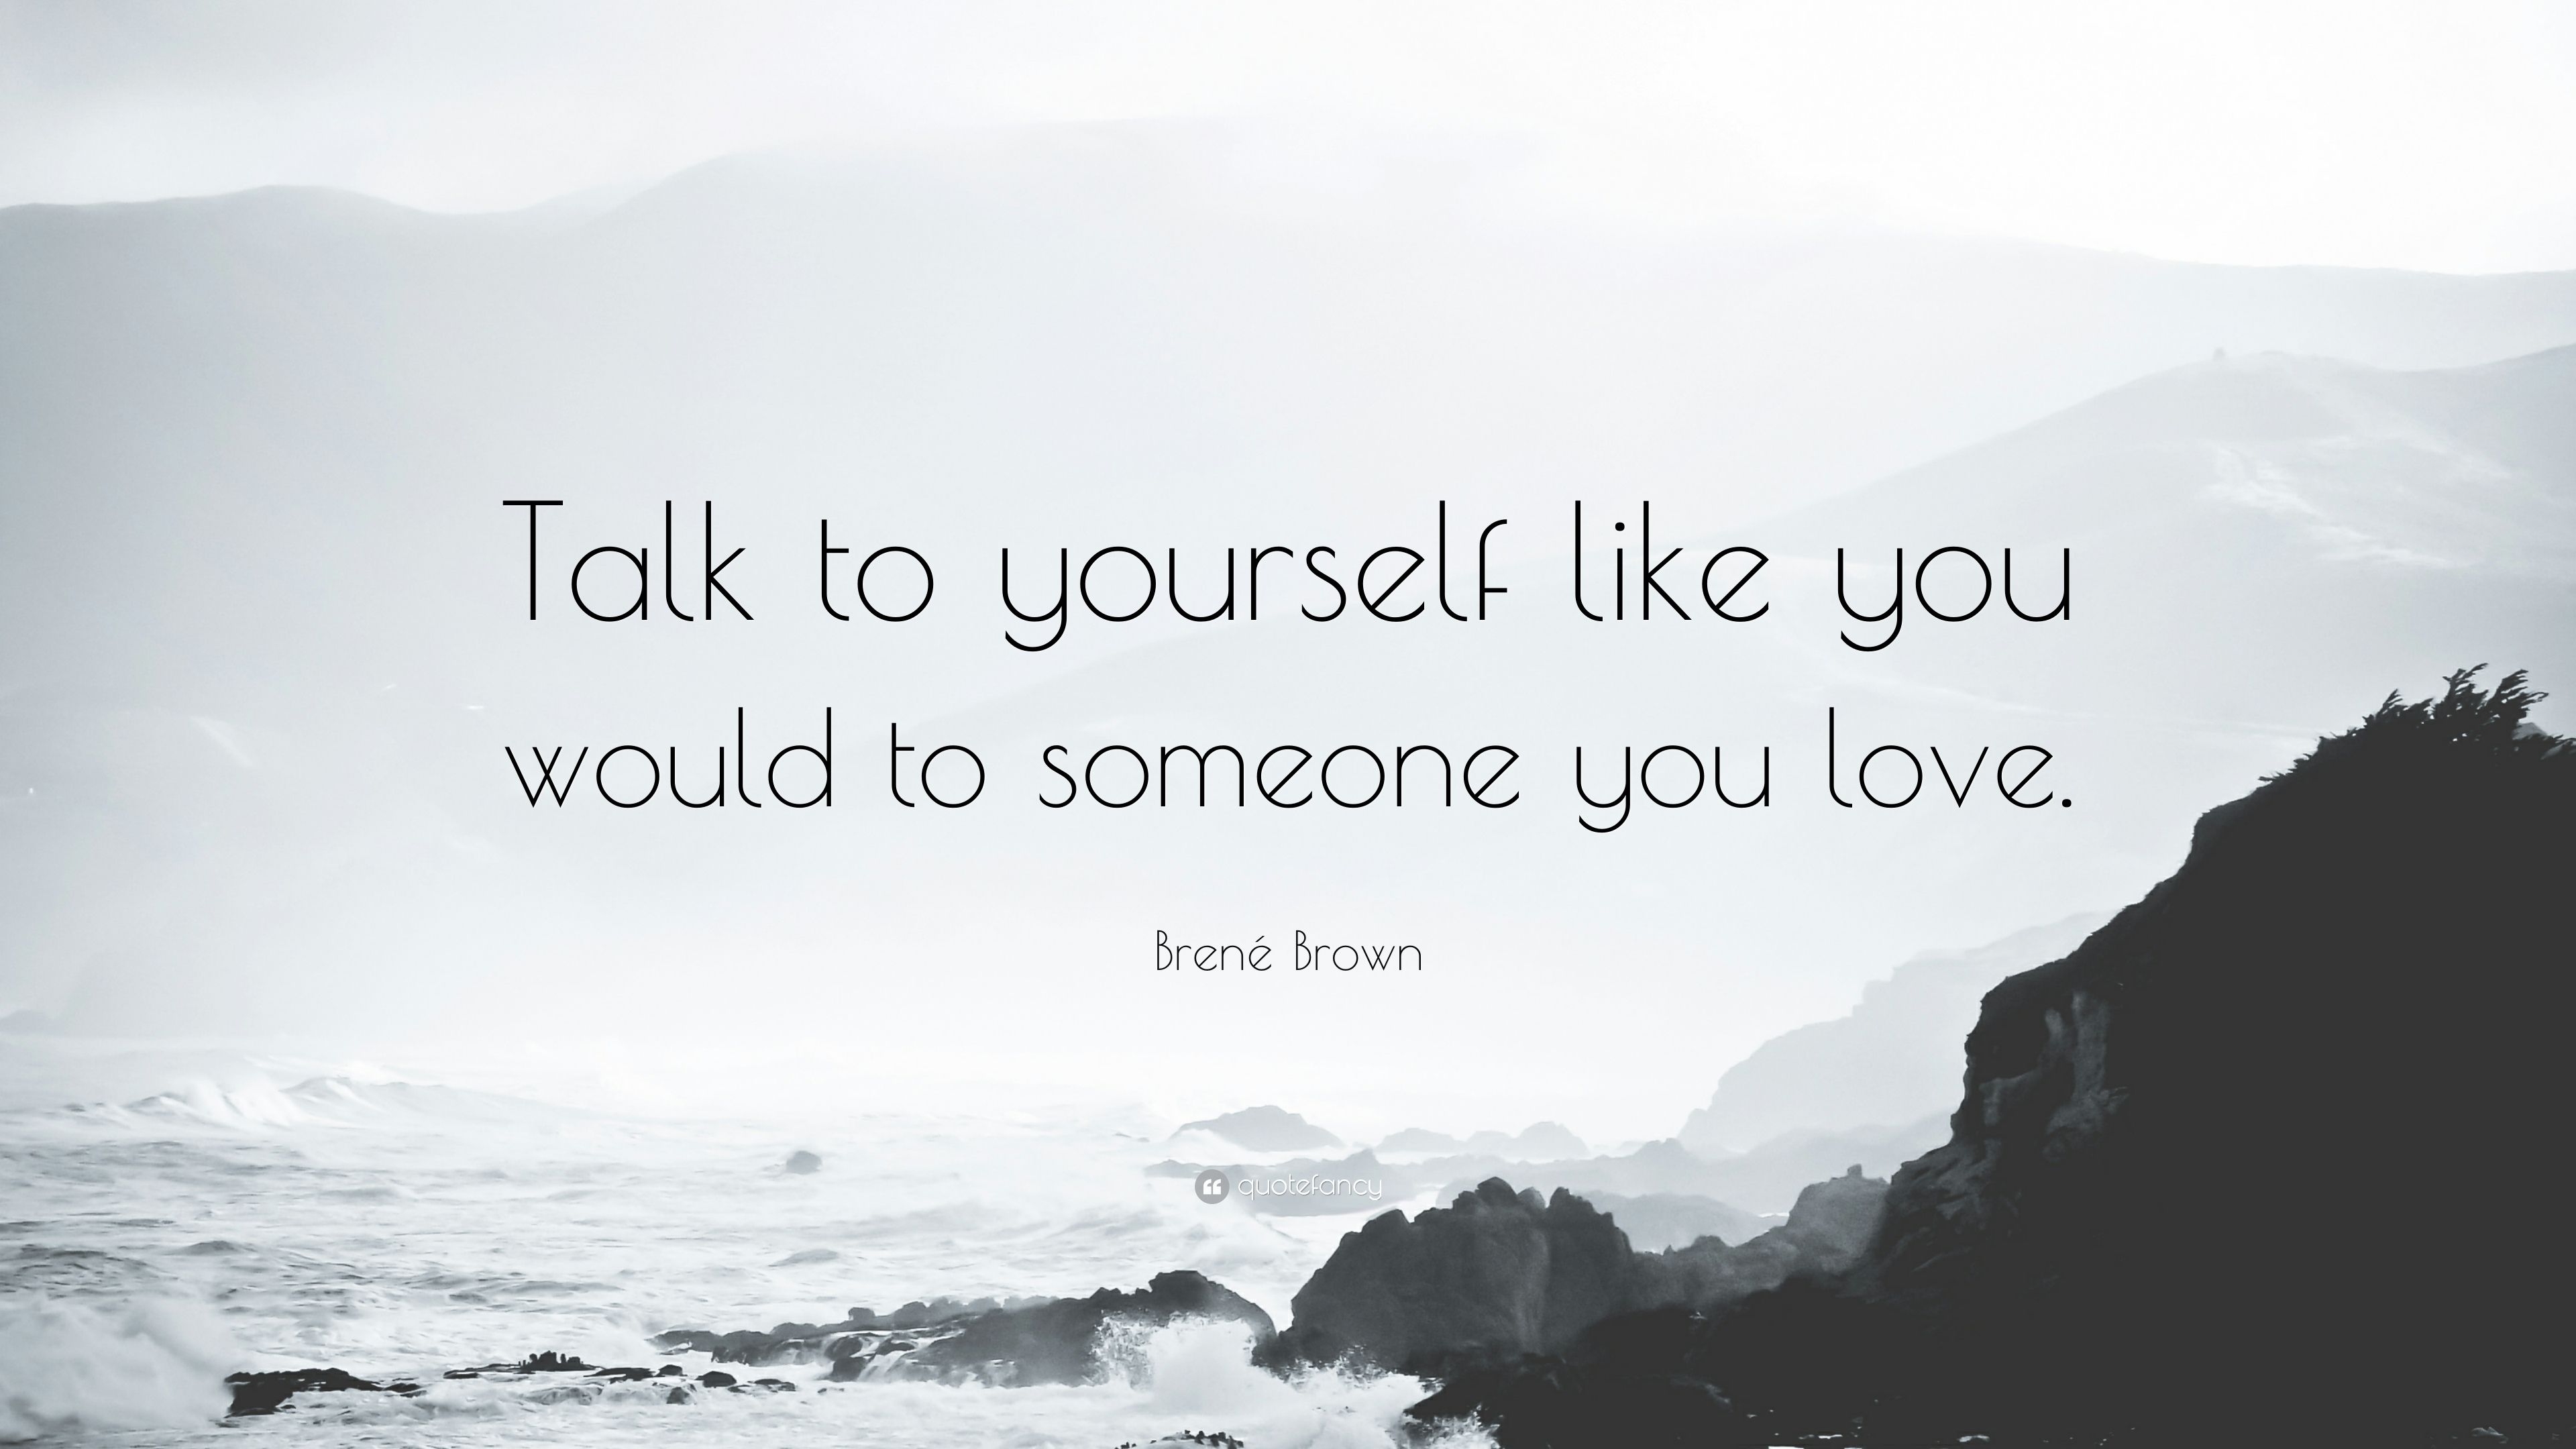 Brené Brown Quote: “Talk to yourself like you would to someone you